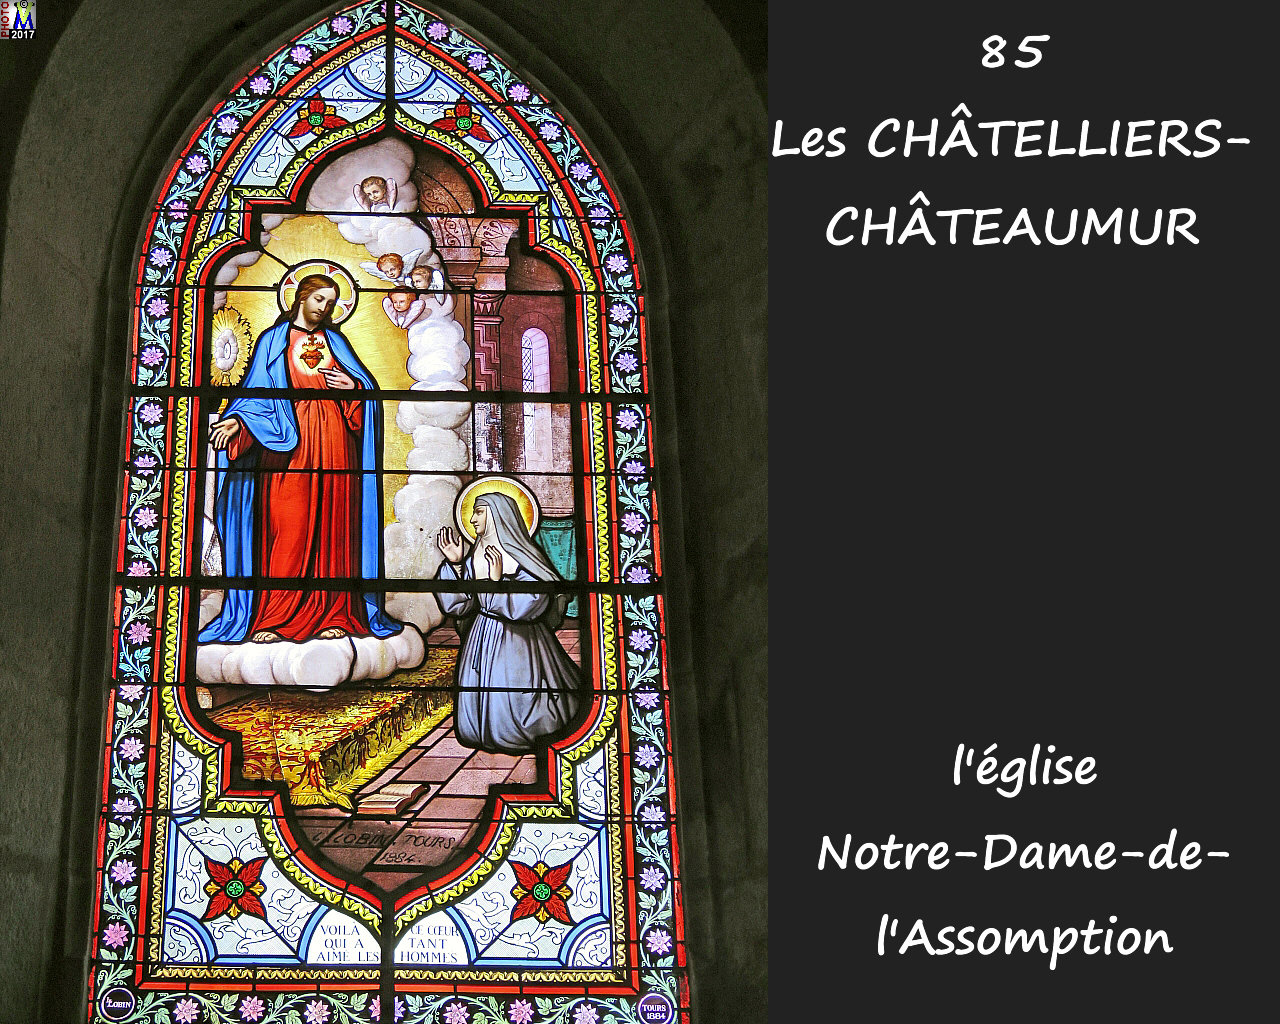 85CHATELLIERS-CHATEAUMUR_eglise_1112.jpg